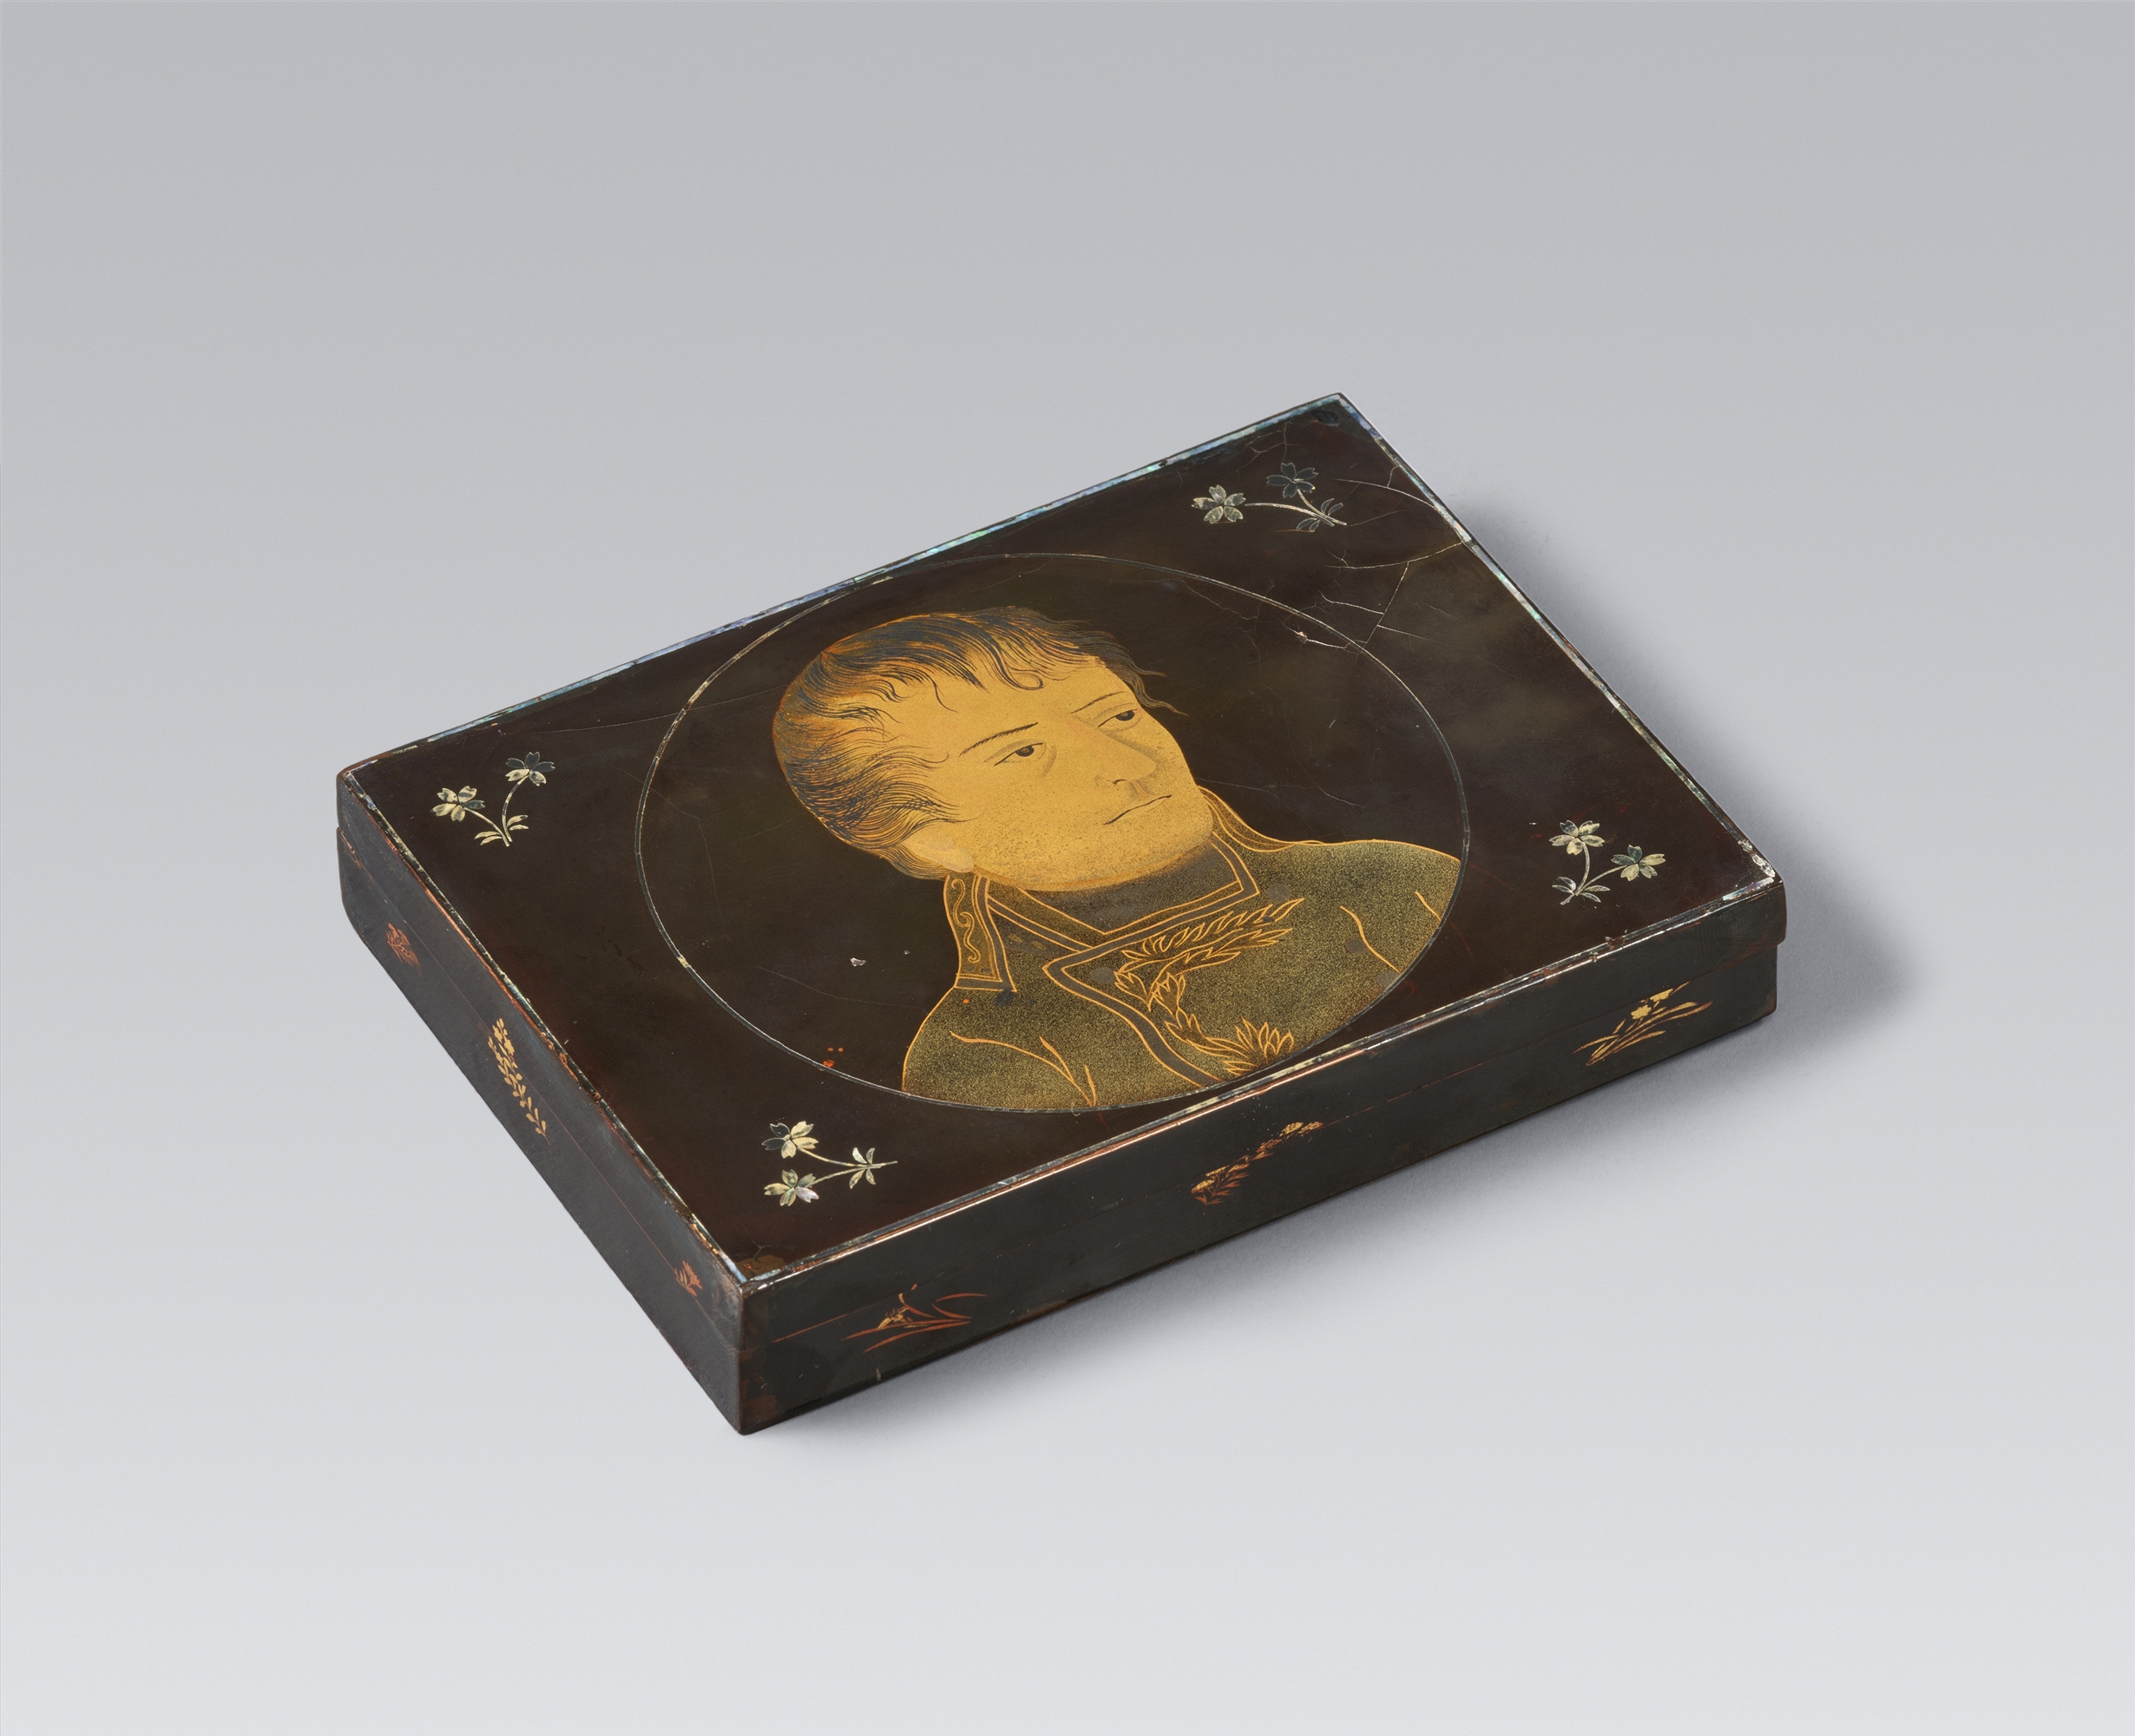 A Nagasaki black lacquer on metal and aogai inlaid lidded box. Around 1805